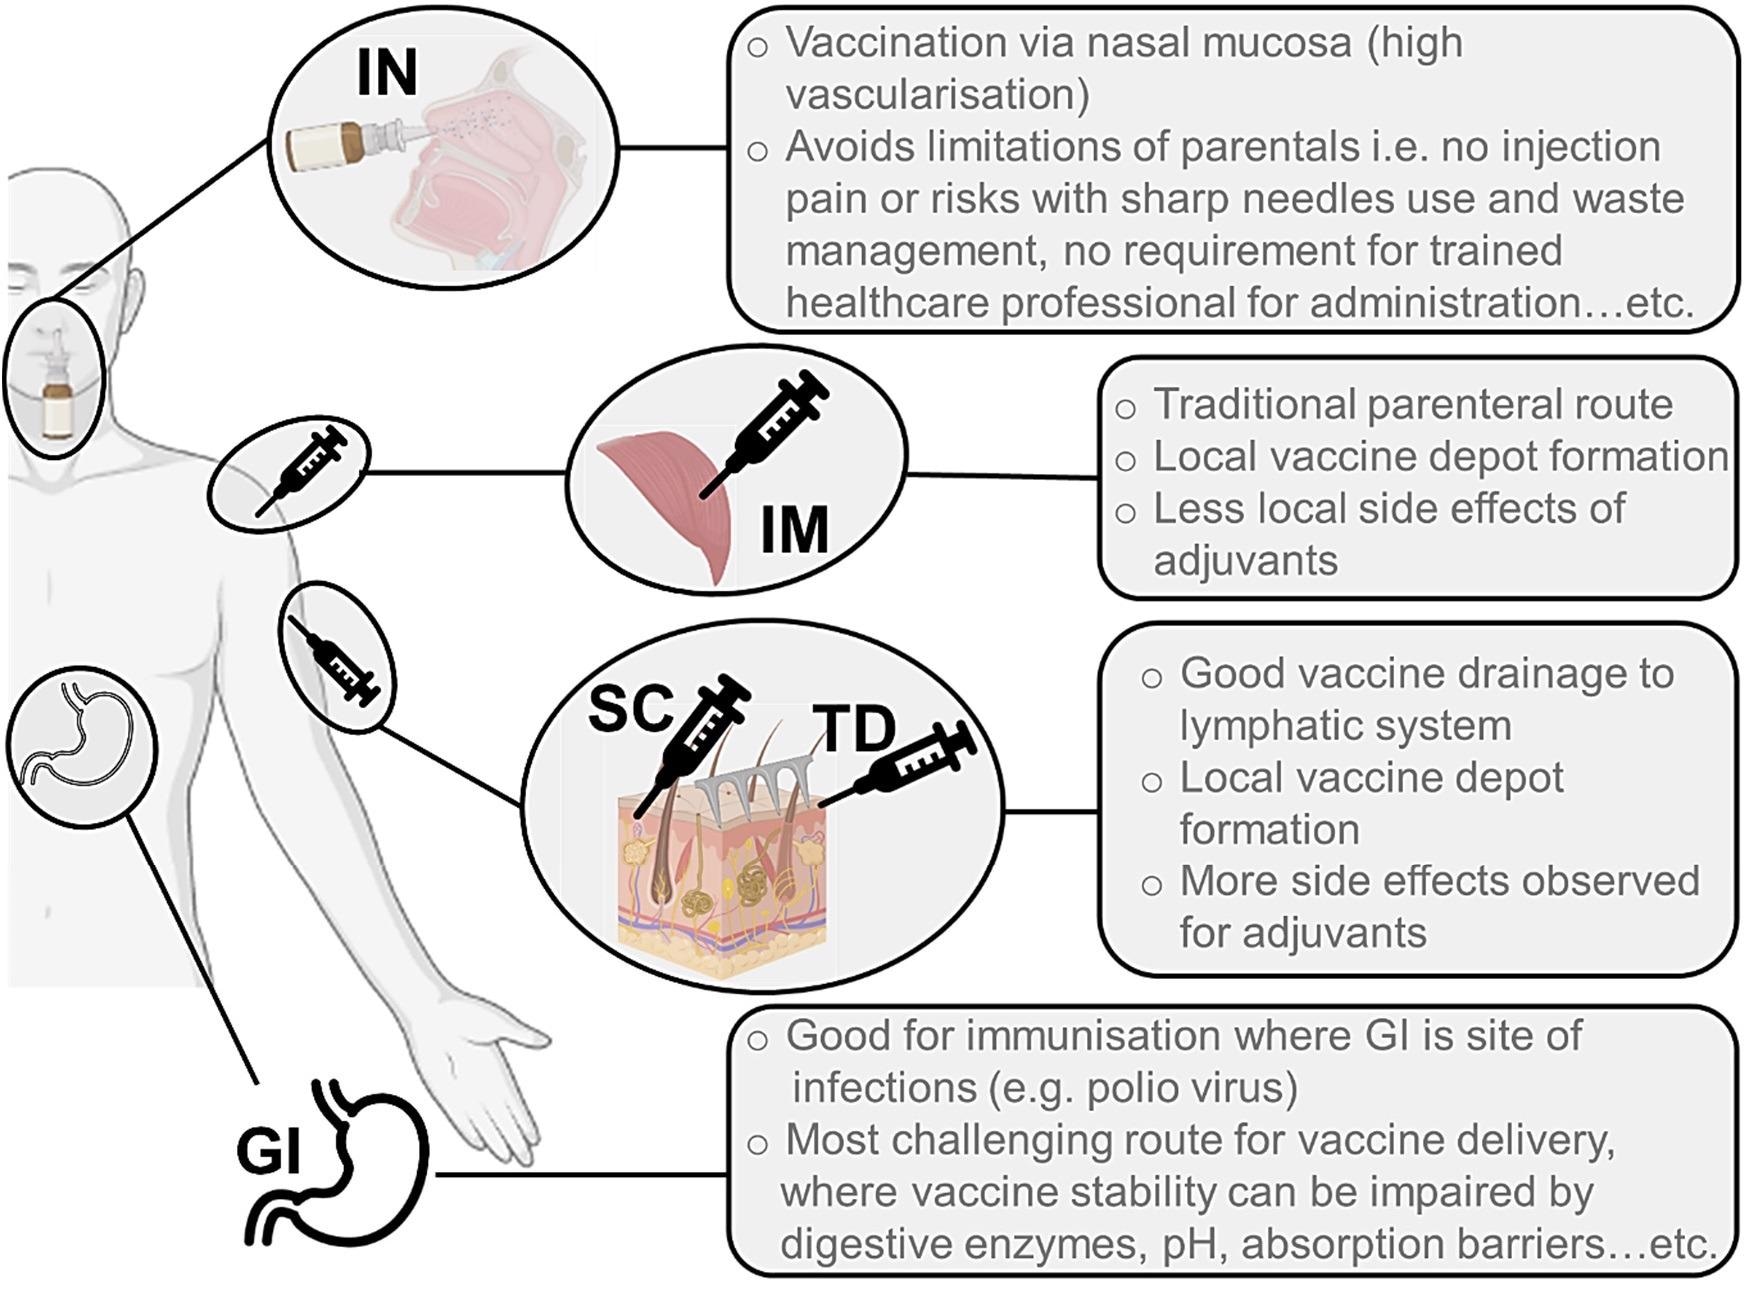 Illustration of the main routes of administration used for delivery of vaccines against viruses. These are IN (intranasal), IM (intramuscular), SC (subcutaneous), TD (transdermal) and oral (GI, gastrointestinal).